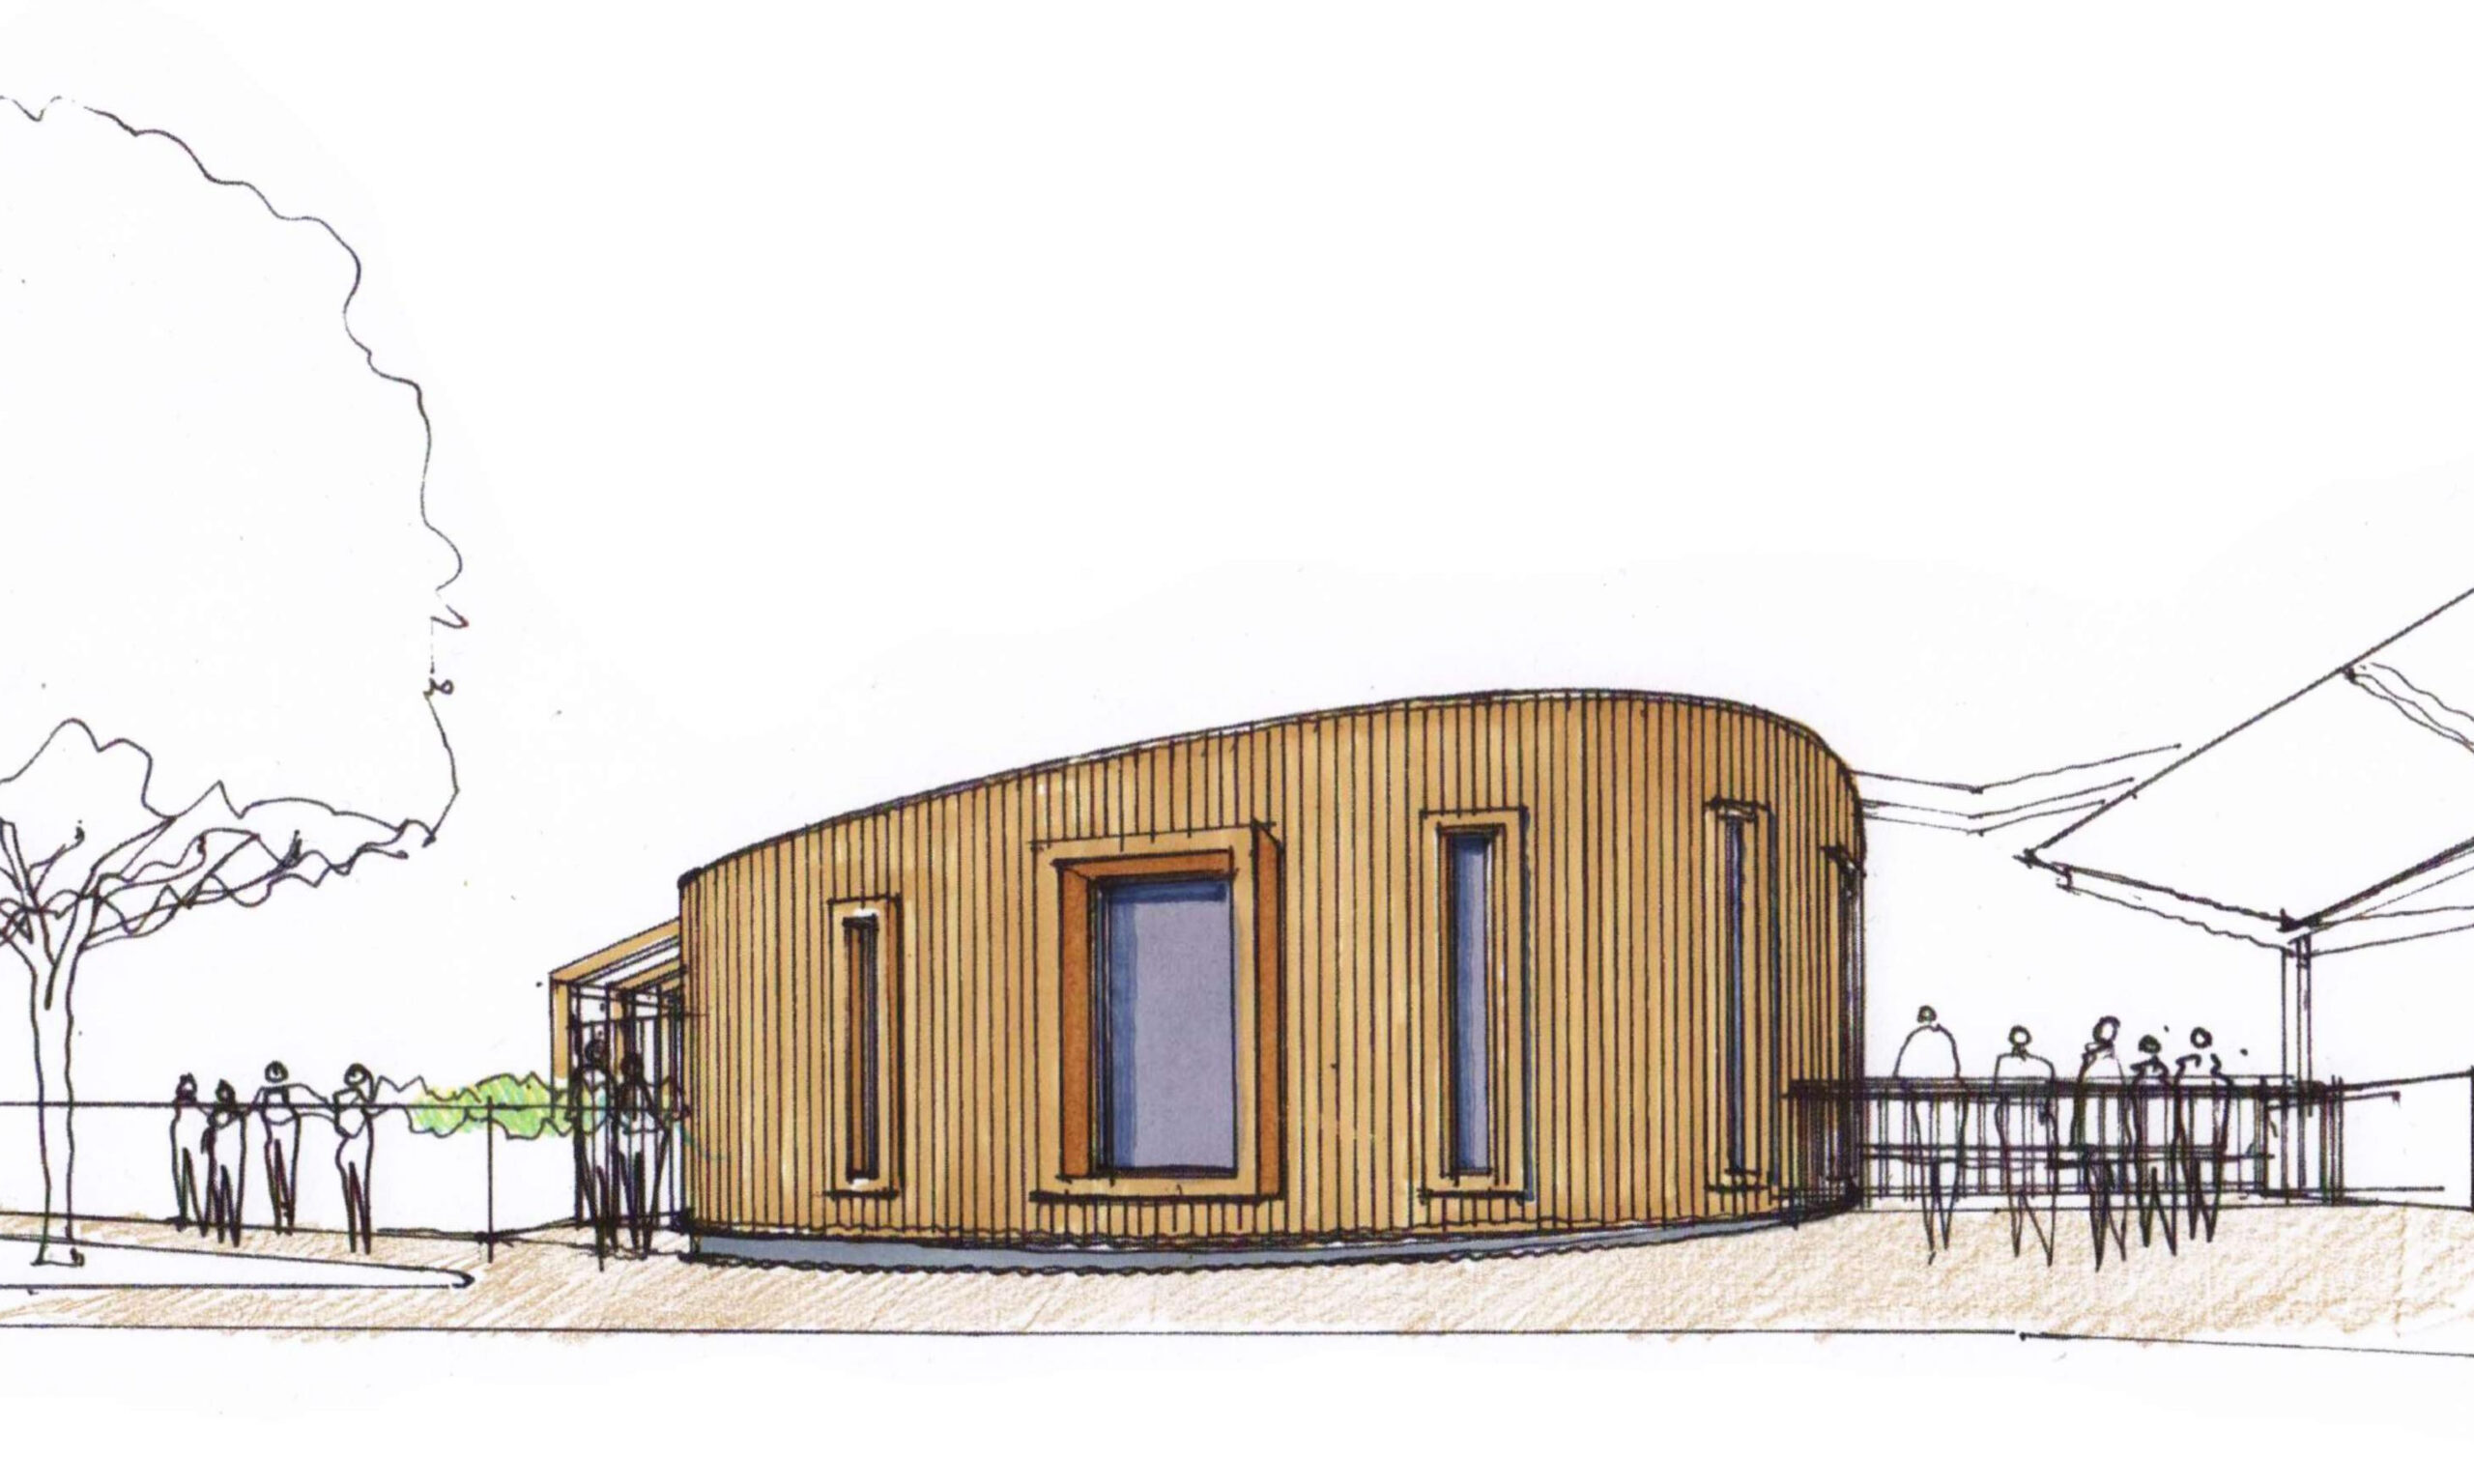 Architects concept sketch for the timber clad CastleHill Eco pod